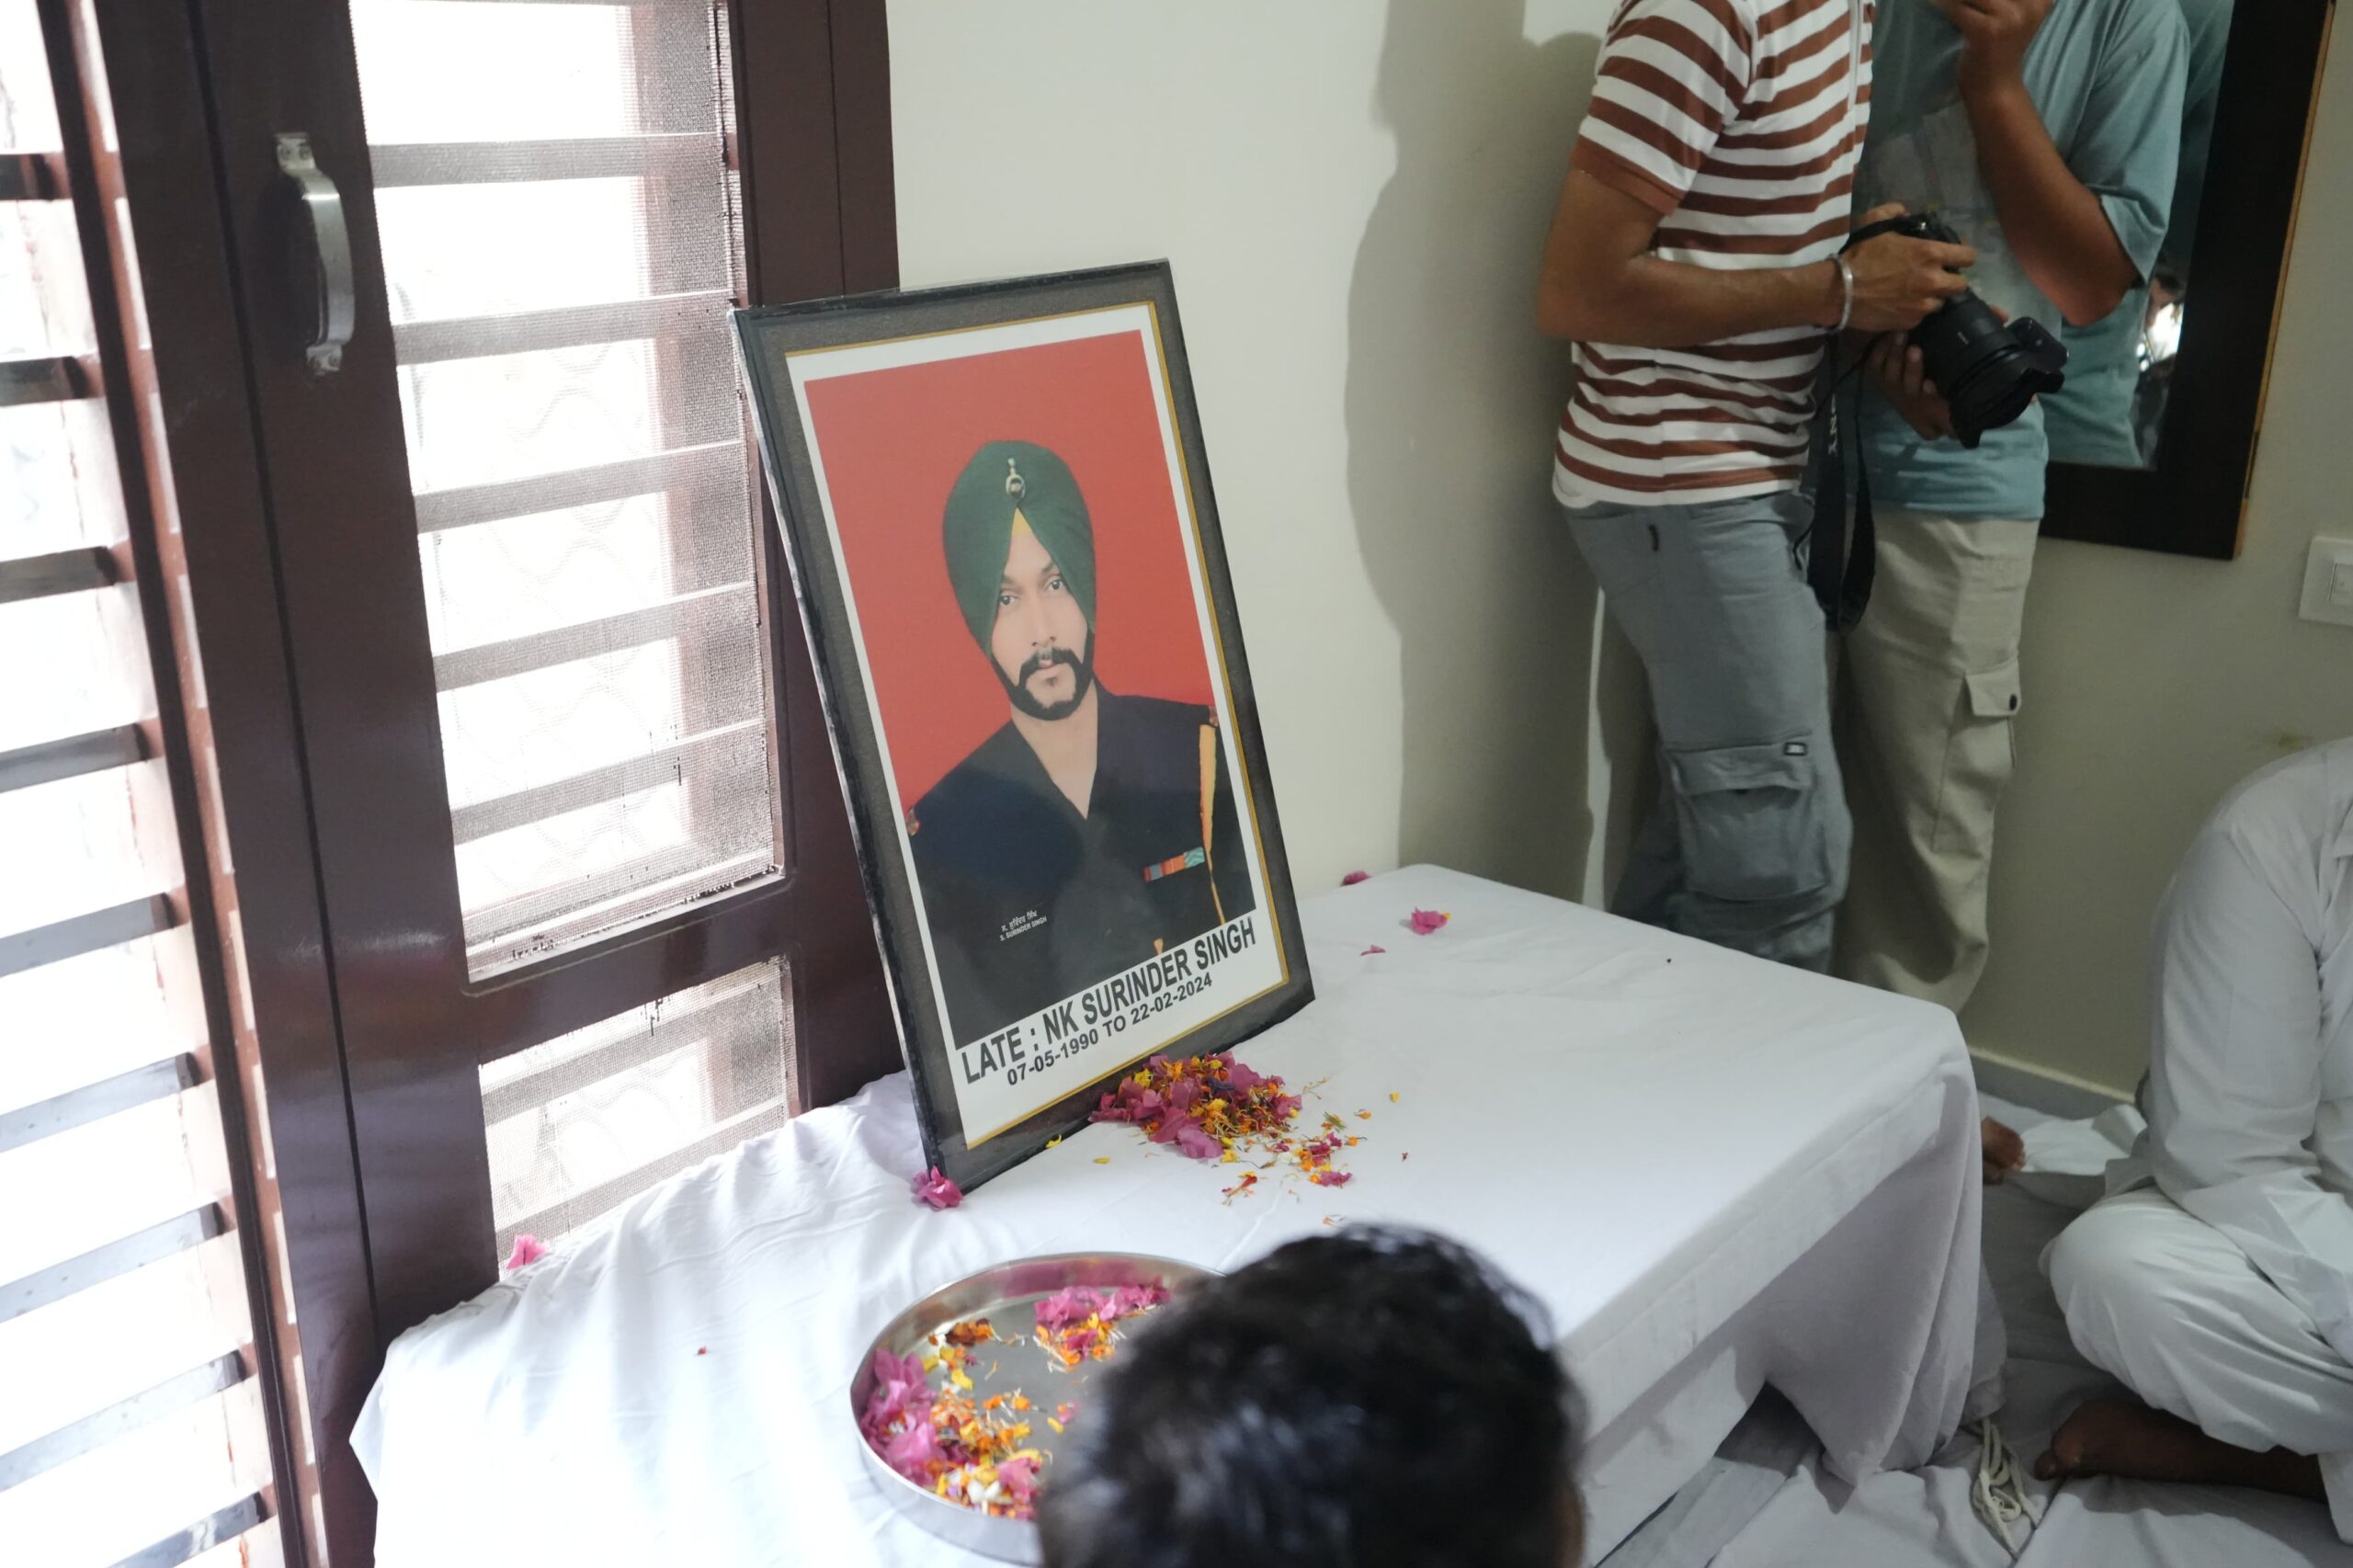 CM hands over cheques worth Rs.1cr as financial assistance to family of martyr Naik Surinder Singh